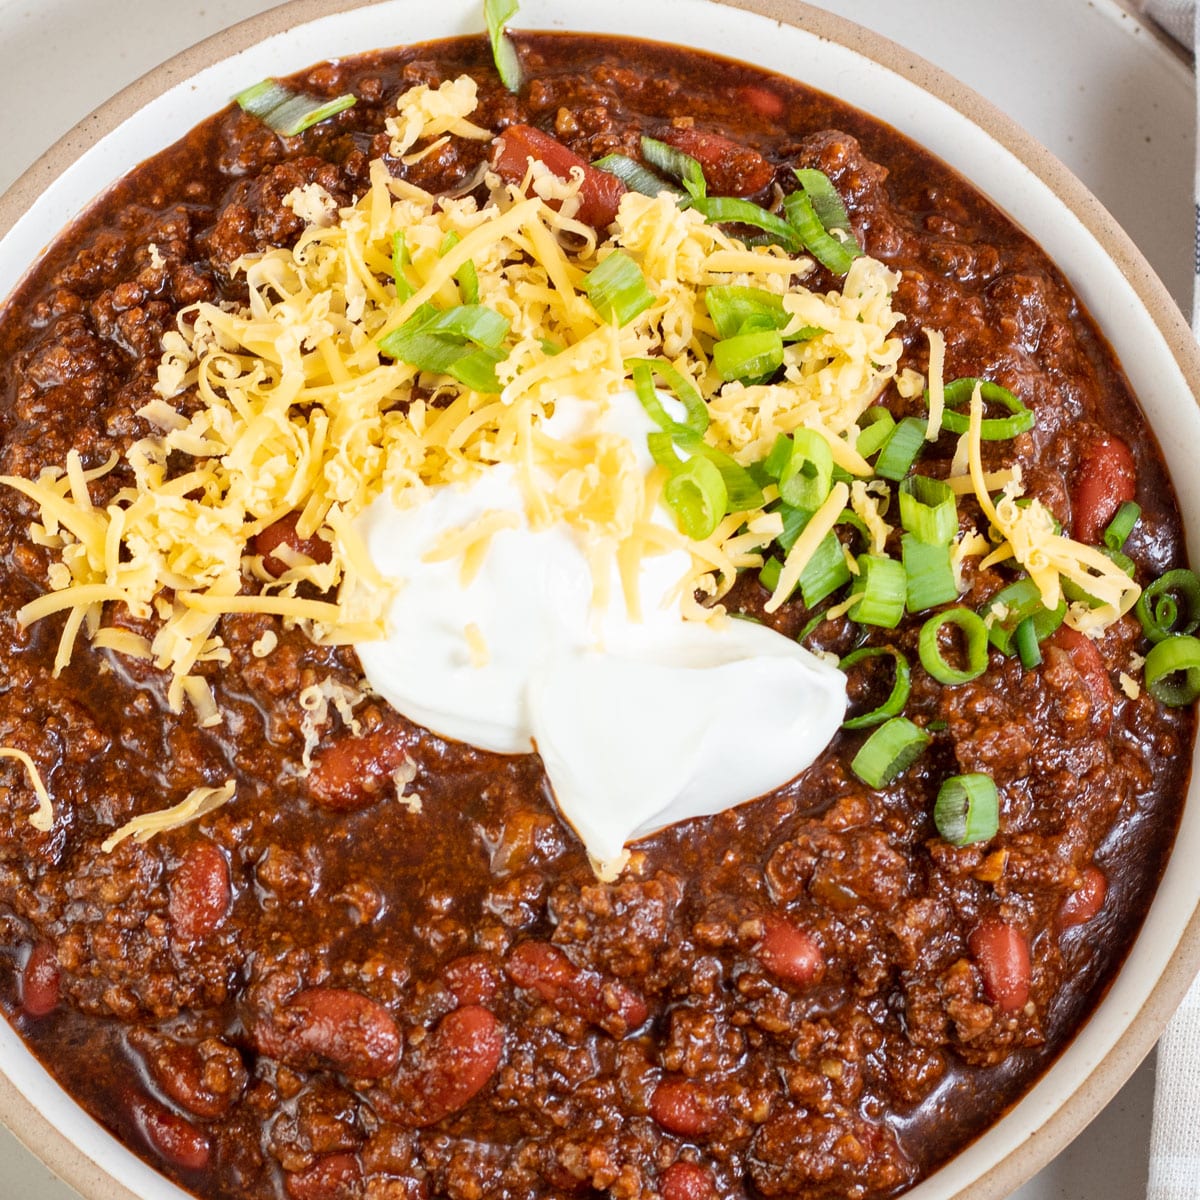 https://bakeitwithlove.com/wp-content/uploads/2023/06/dutch-oven-chili-sq.jpg